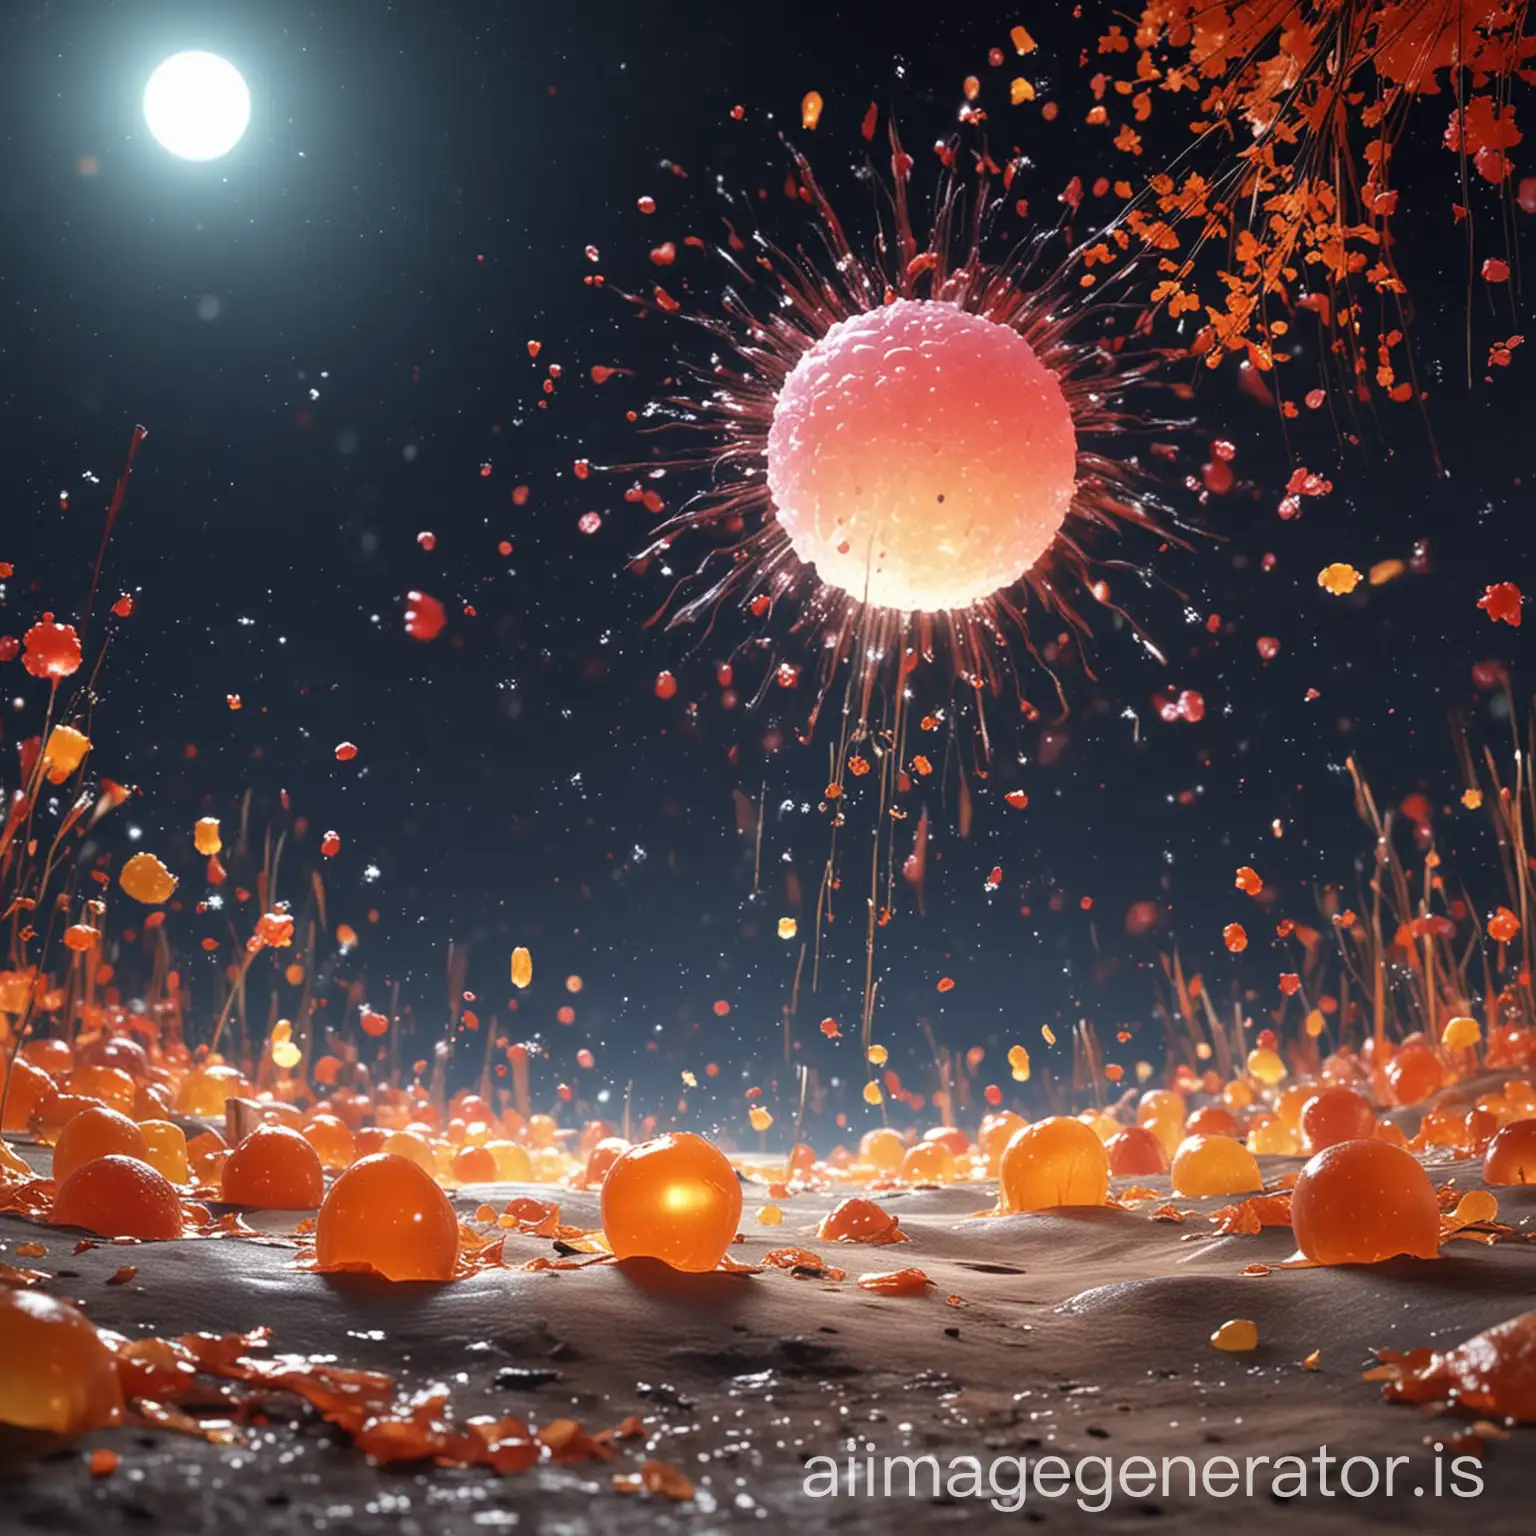 middle autumn festival's jelly crush background, bright moon, fireworks blooming, need animation 3d feeling